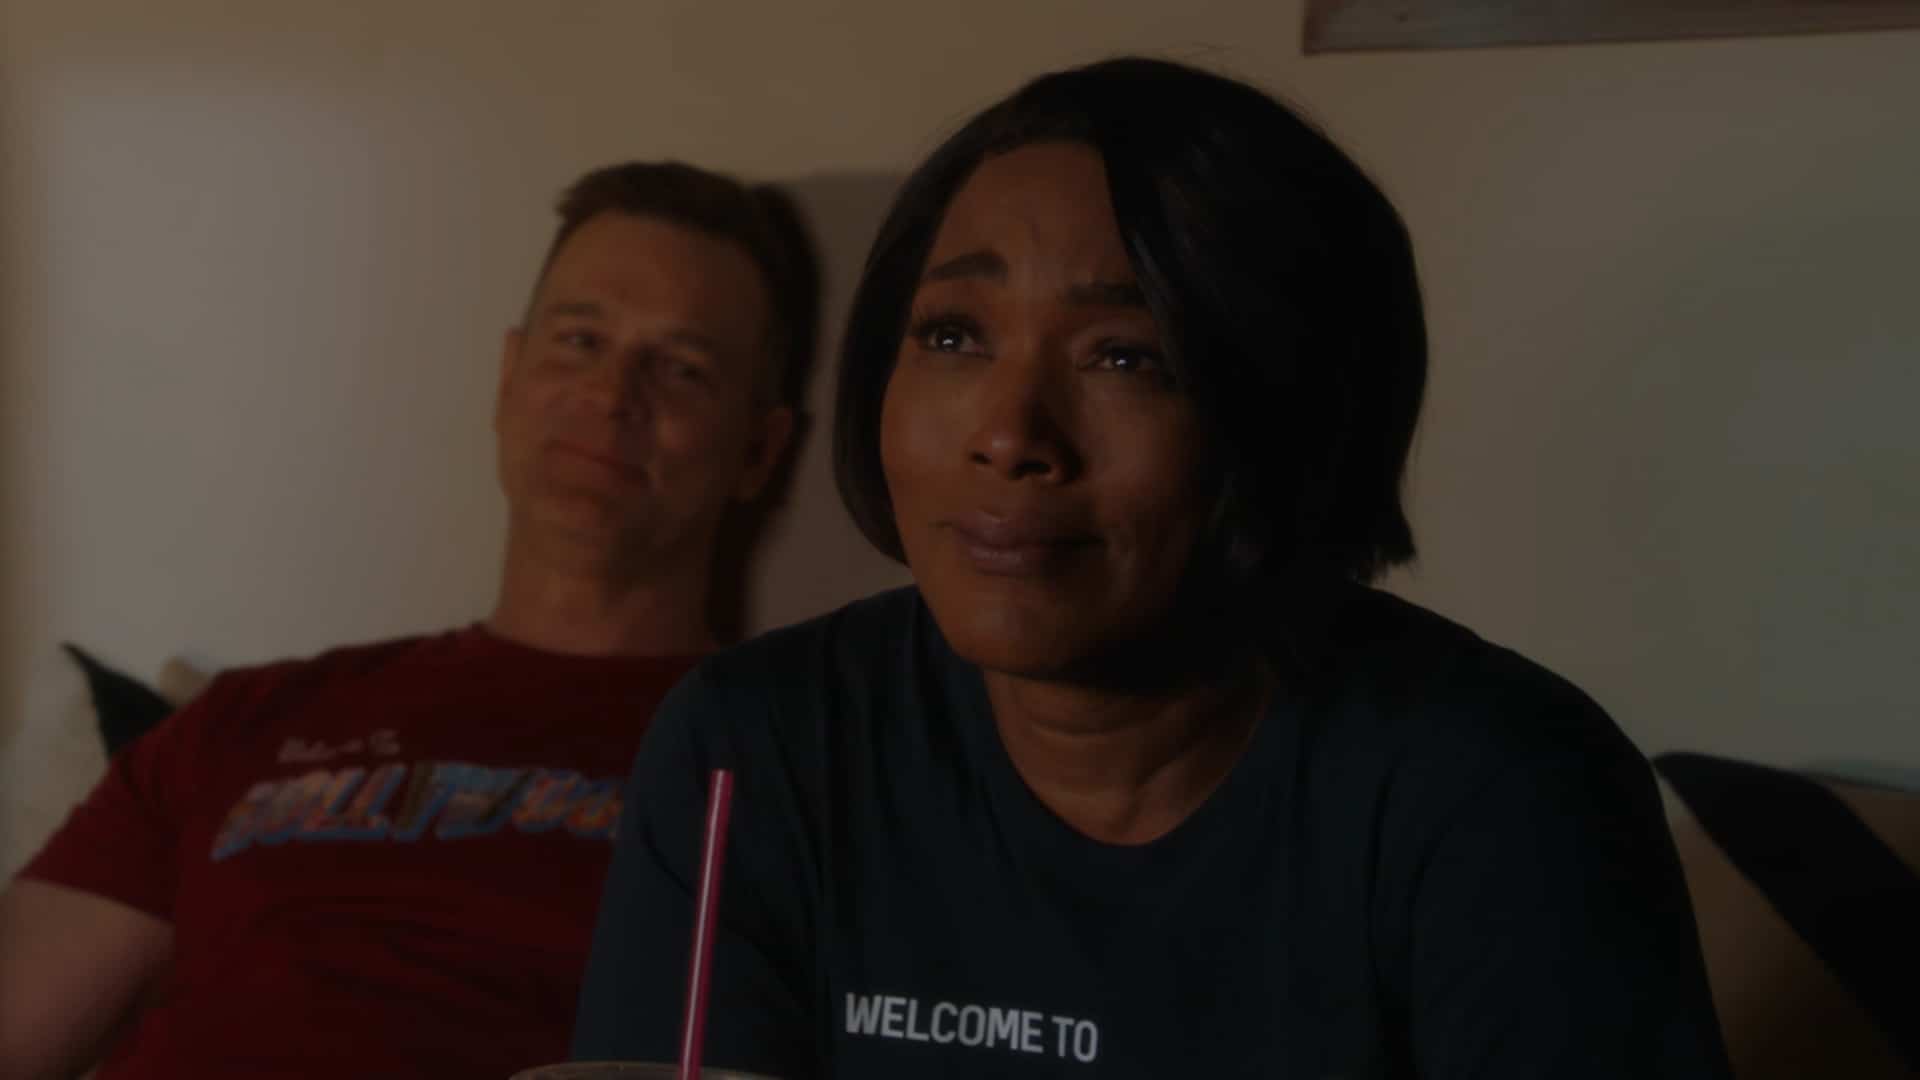 Peter Krause as Bobby and Angela Bassett as Athena